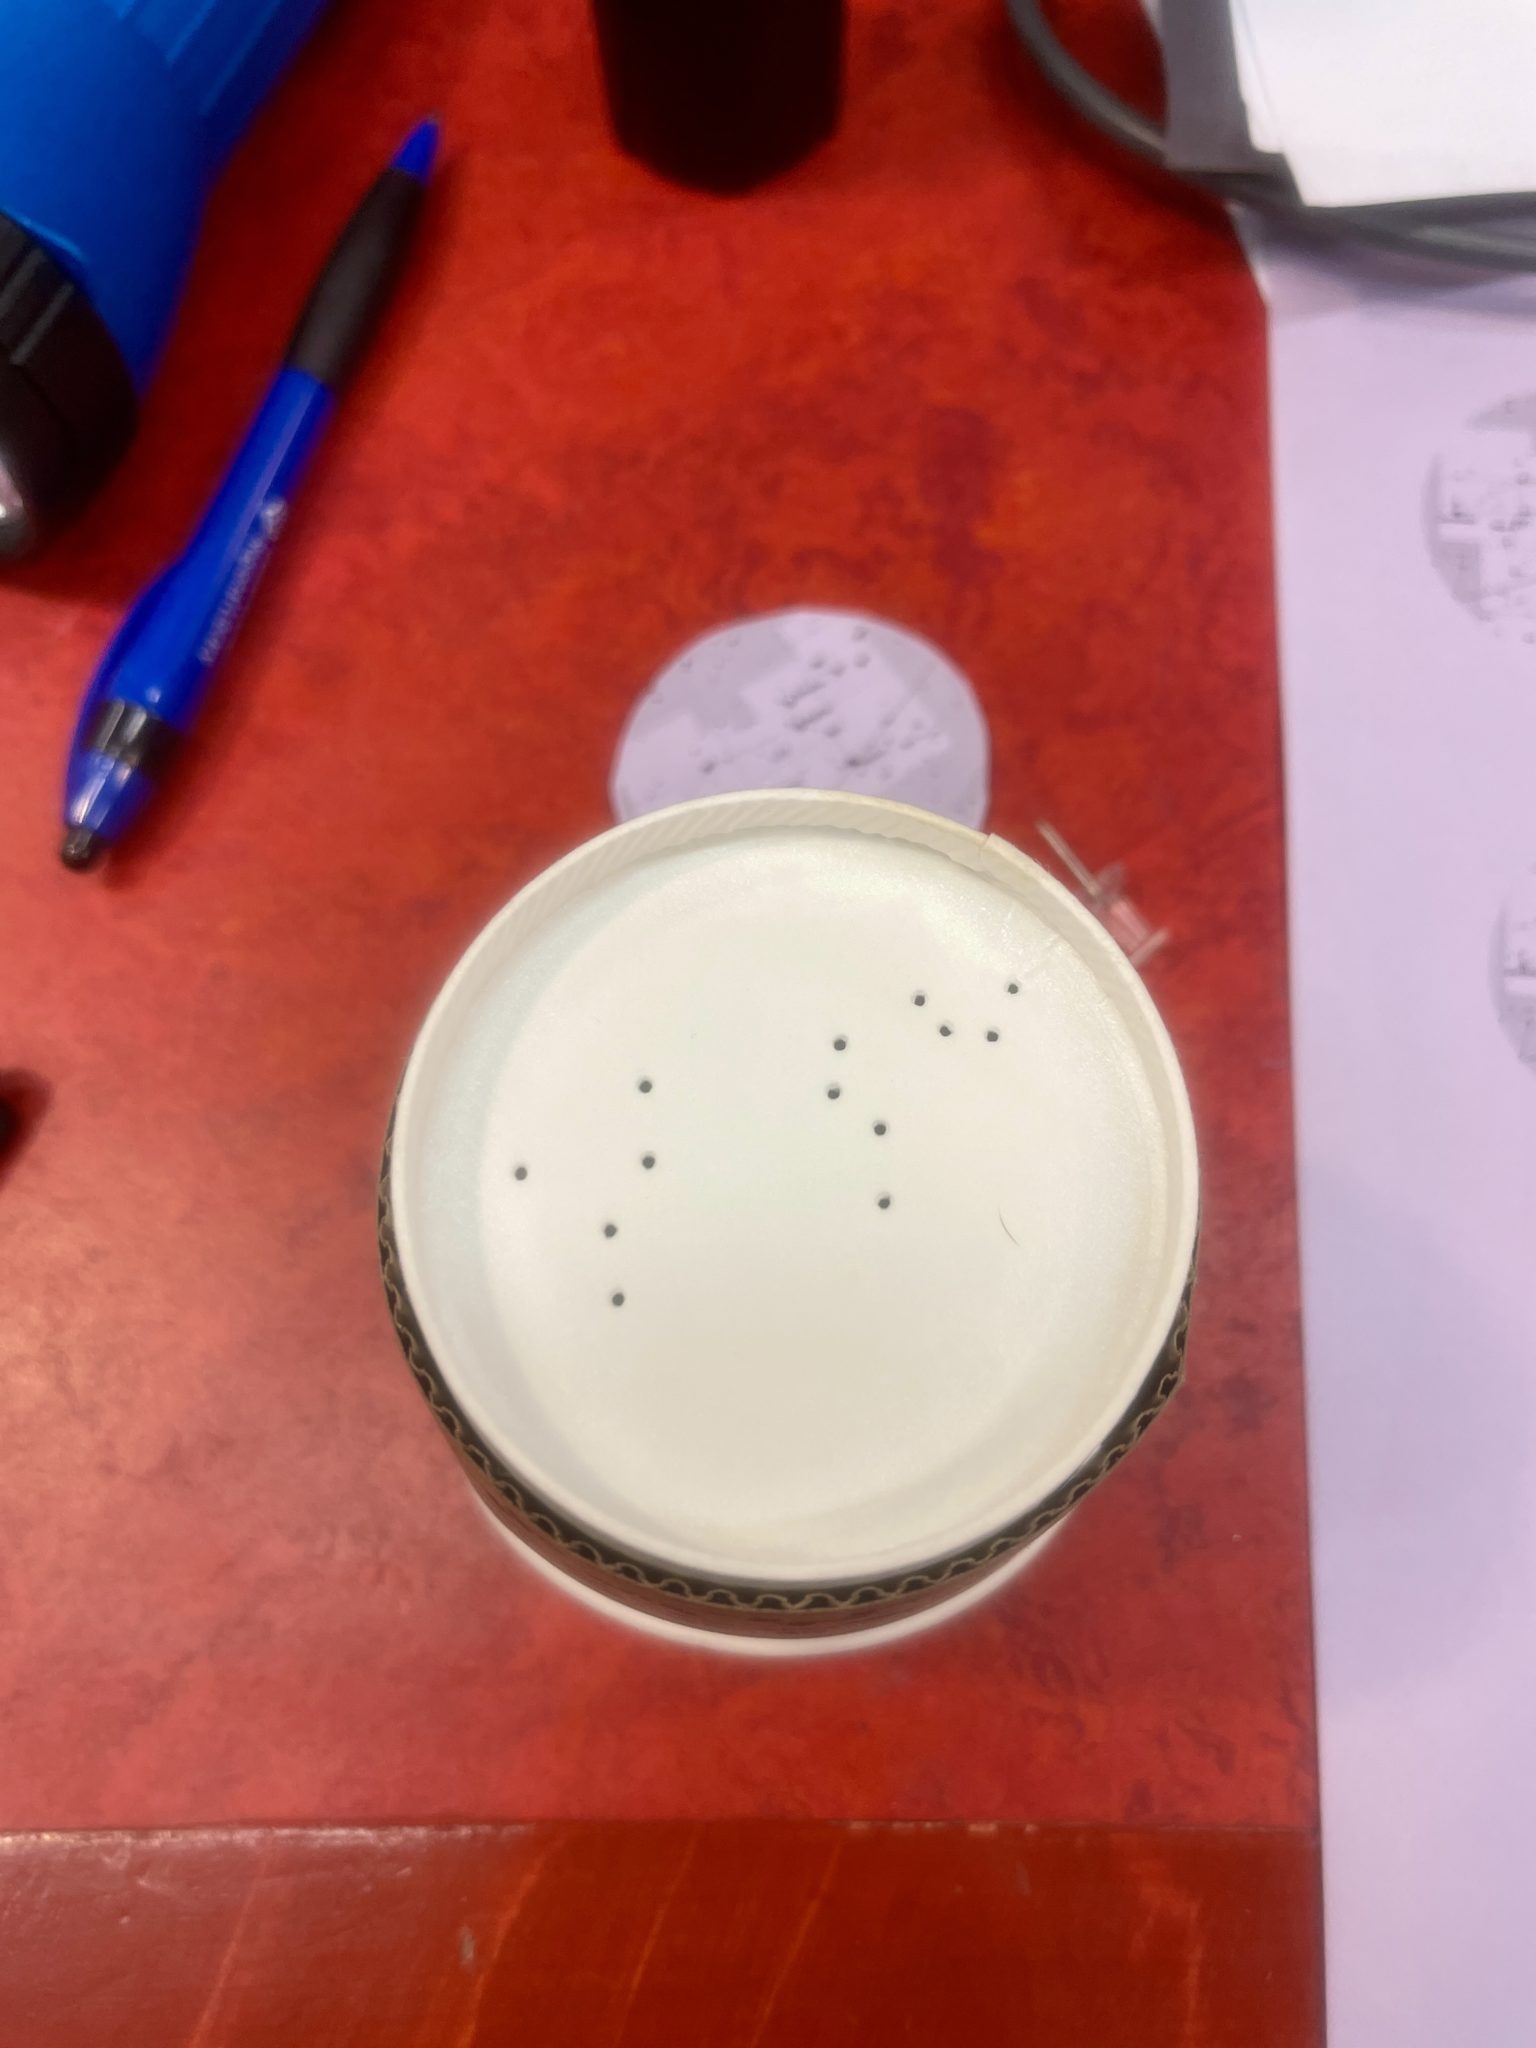 Image of a paper coffee cup turned upside down. On the bottom of the cup, a map of the constellation Leo is incised with small pinpricks.